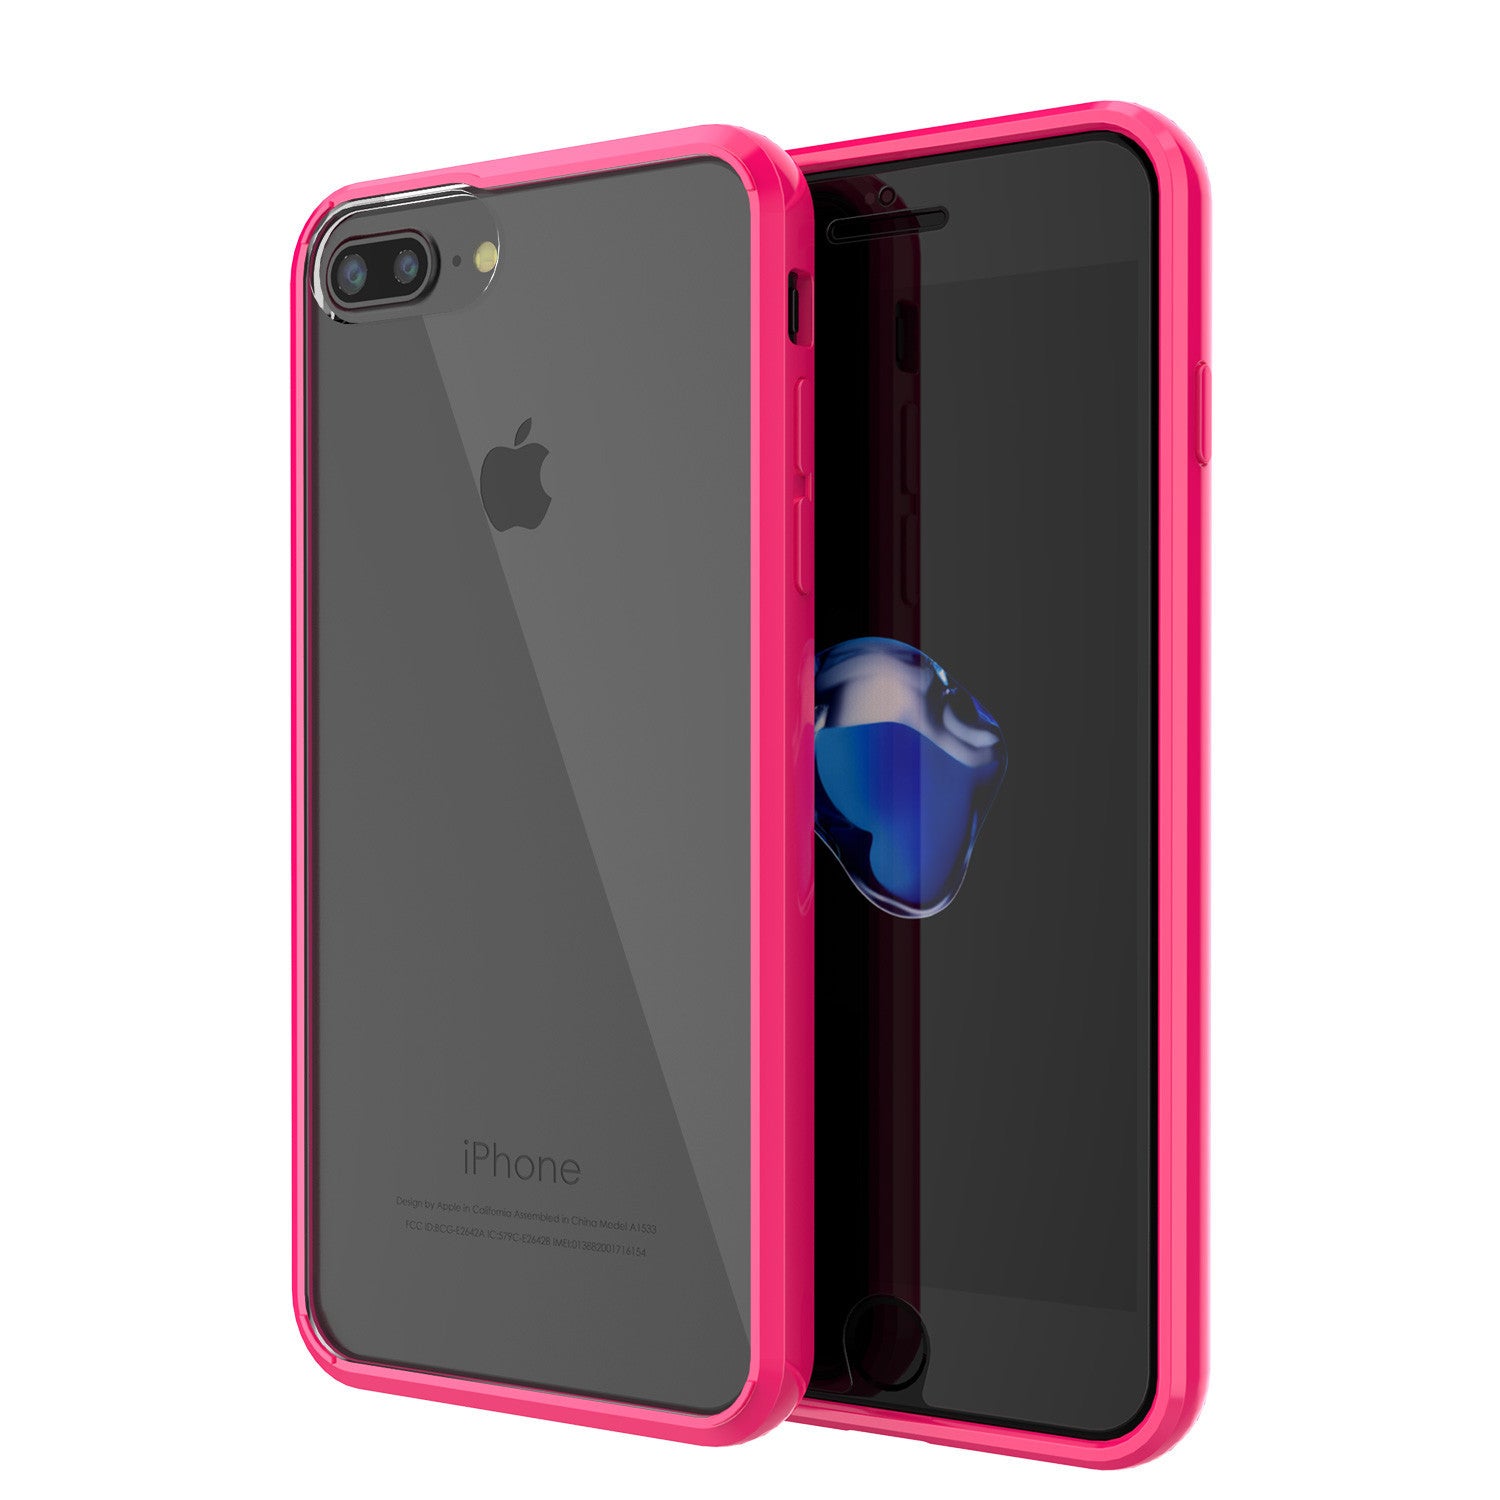 iPhone 7 Case Punkcase® LUCID 2.0 Pink Series w/ PUNK SHIELD Screen Protector | Ultra Fit (Color in image: pink)